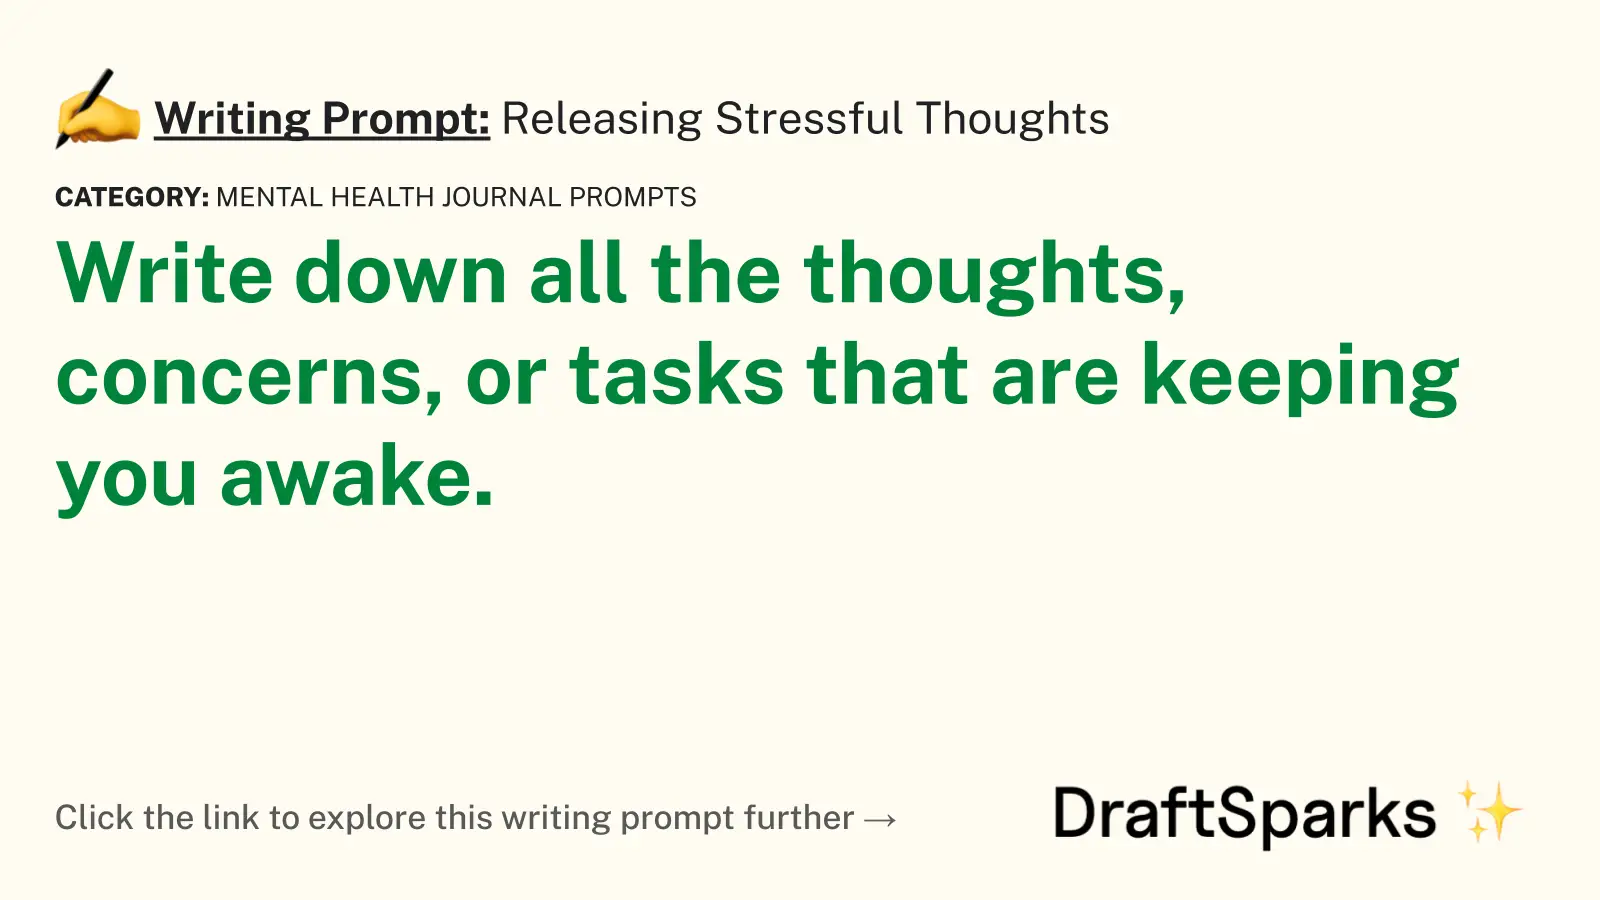 Releasing Stressful Thoughts